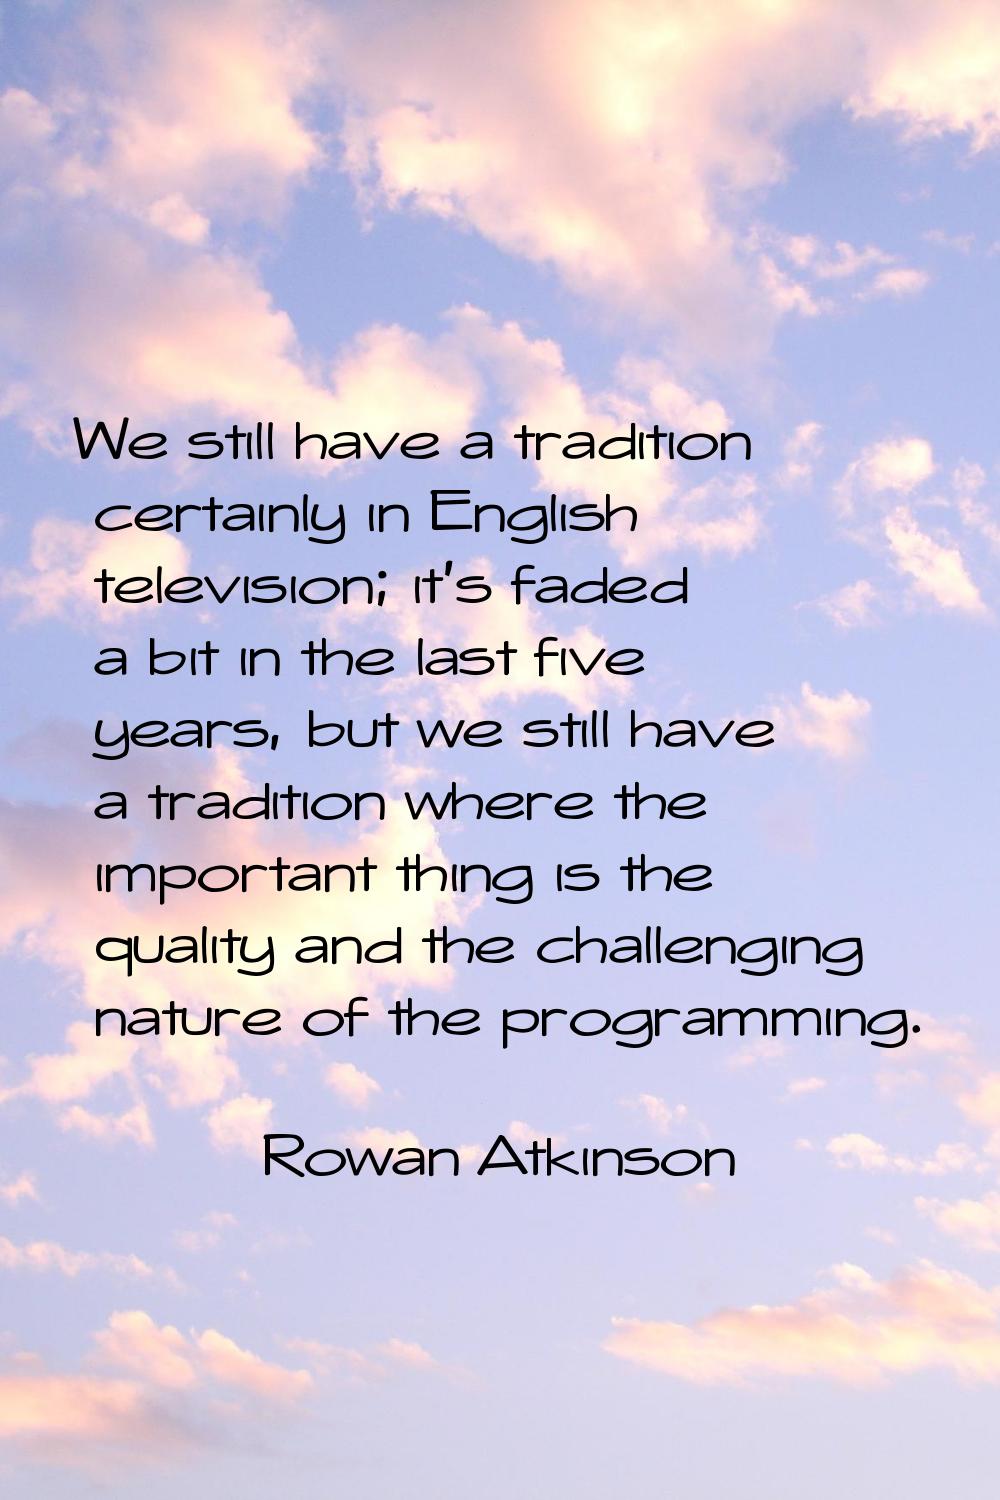 We still have a tradition certainly in English television; it's faded a bit in the last five years,